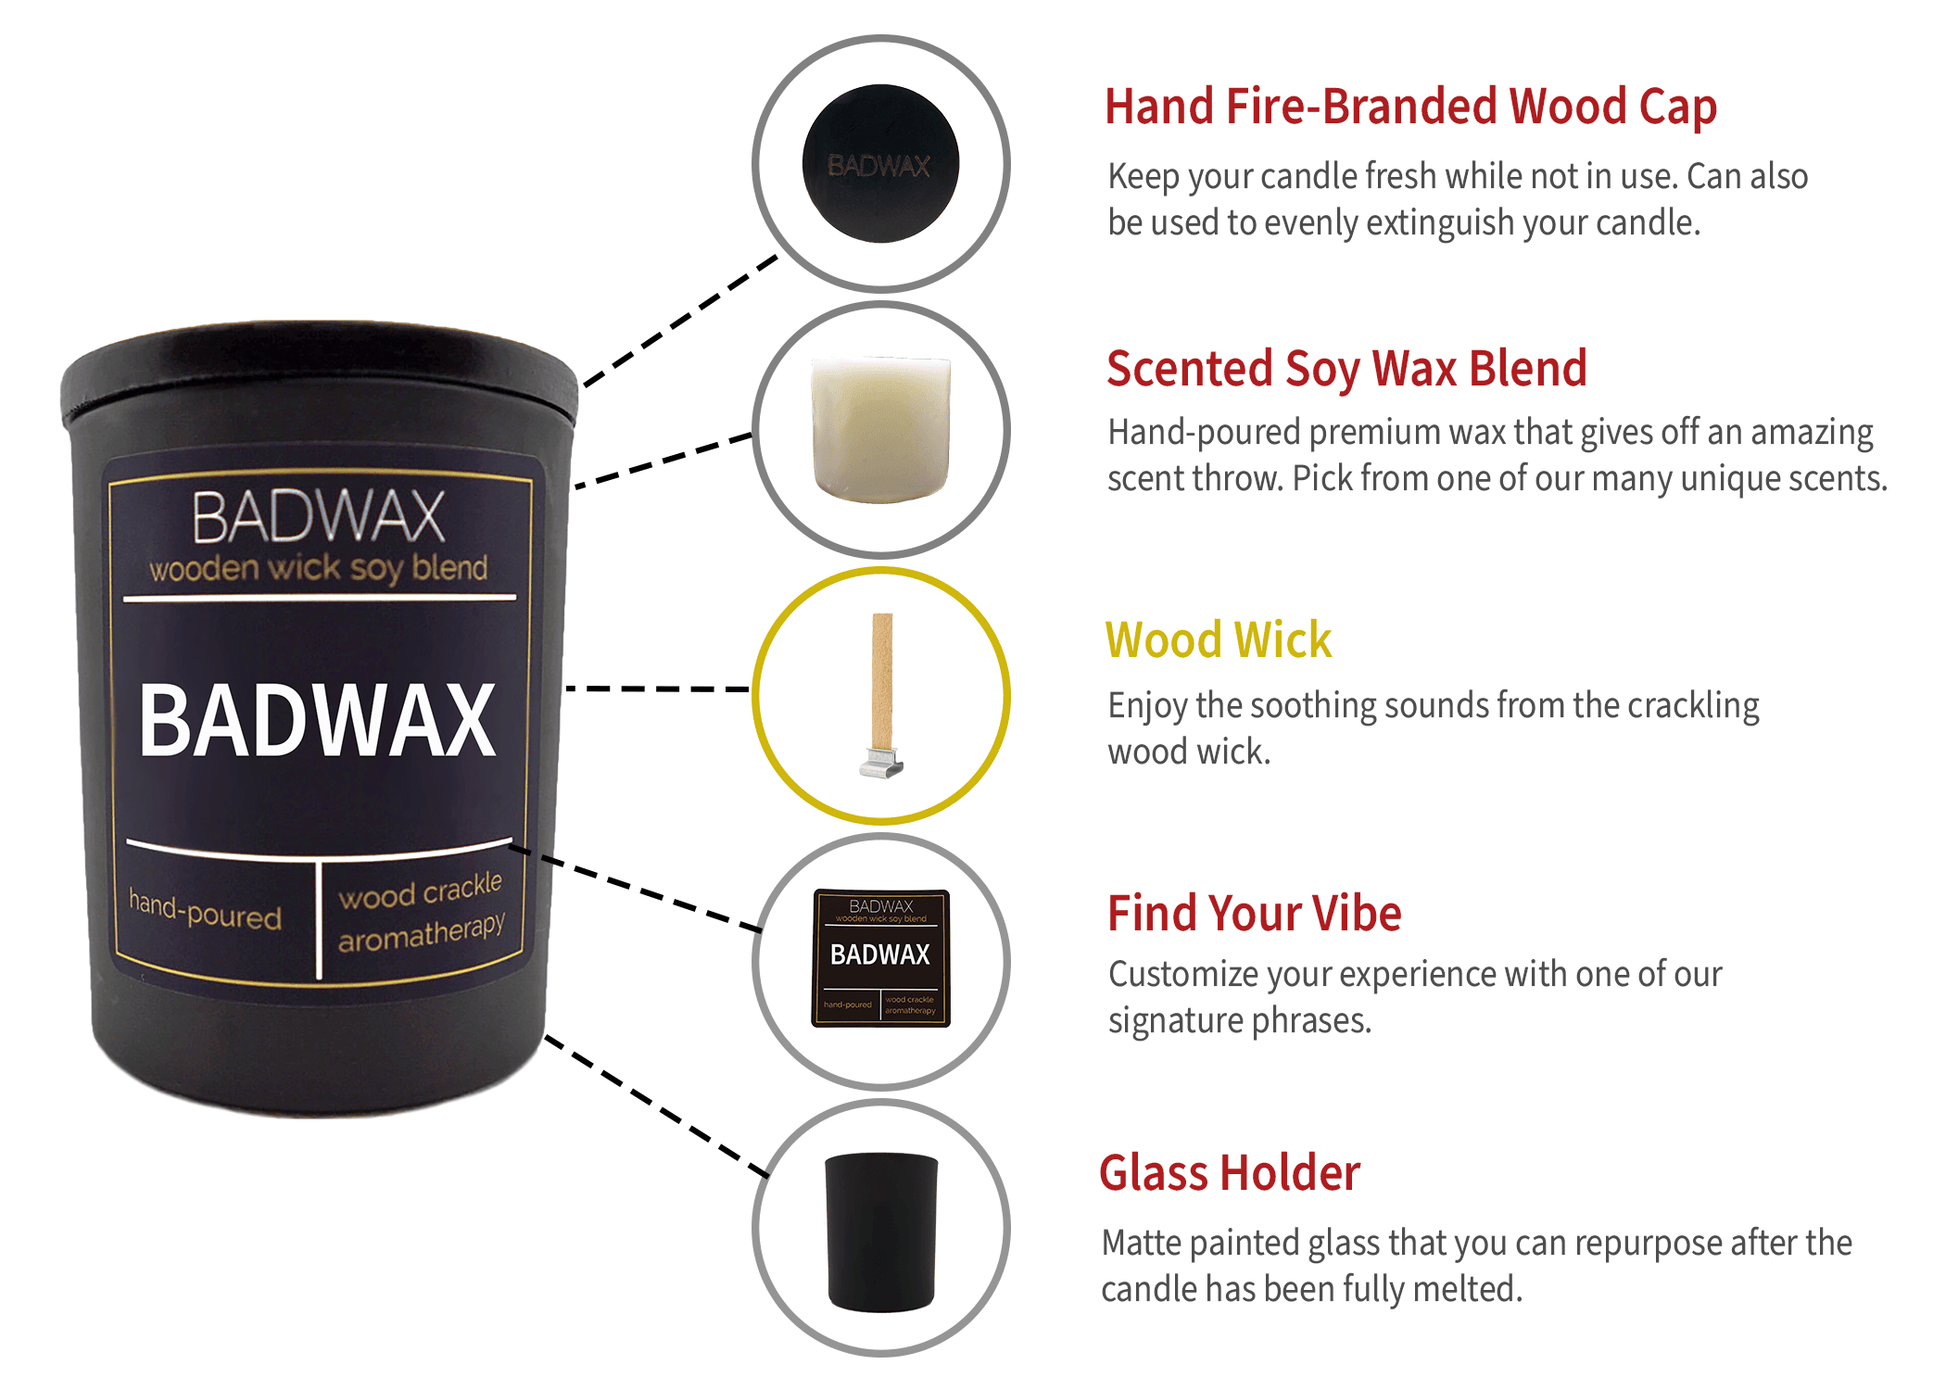 Pussy Whisperer - Woodwick Candle - BADWAX